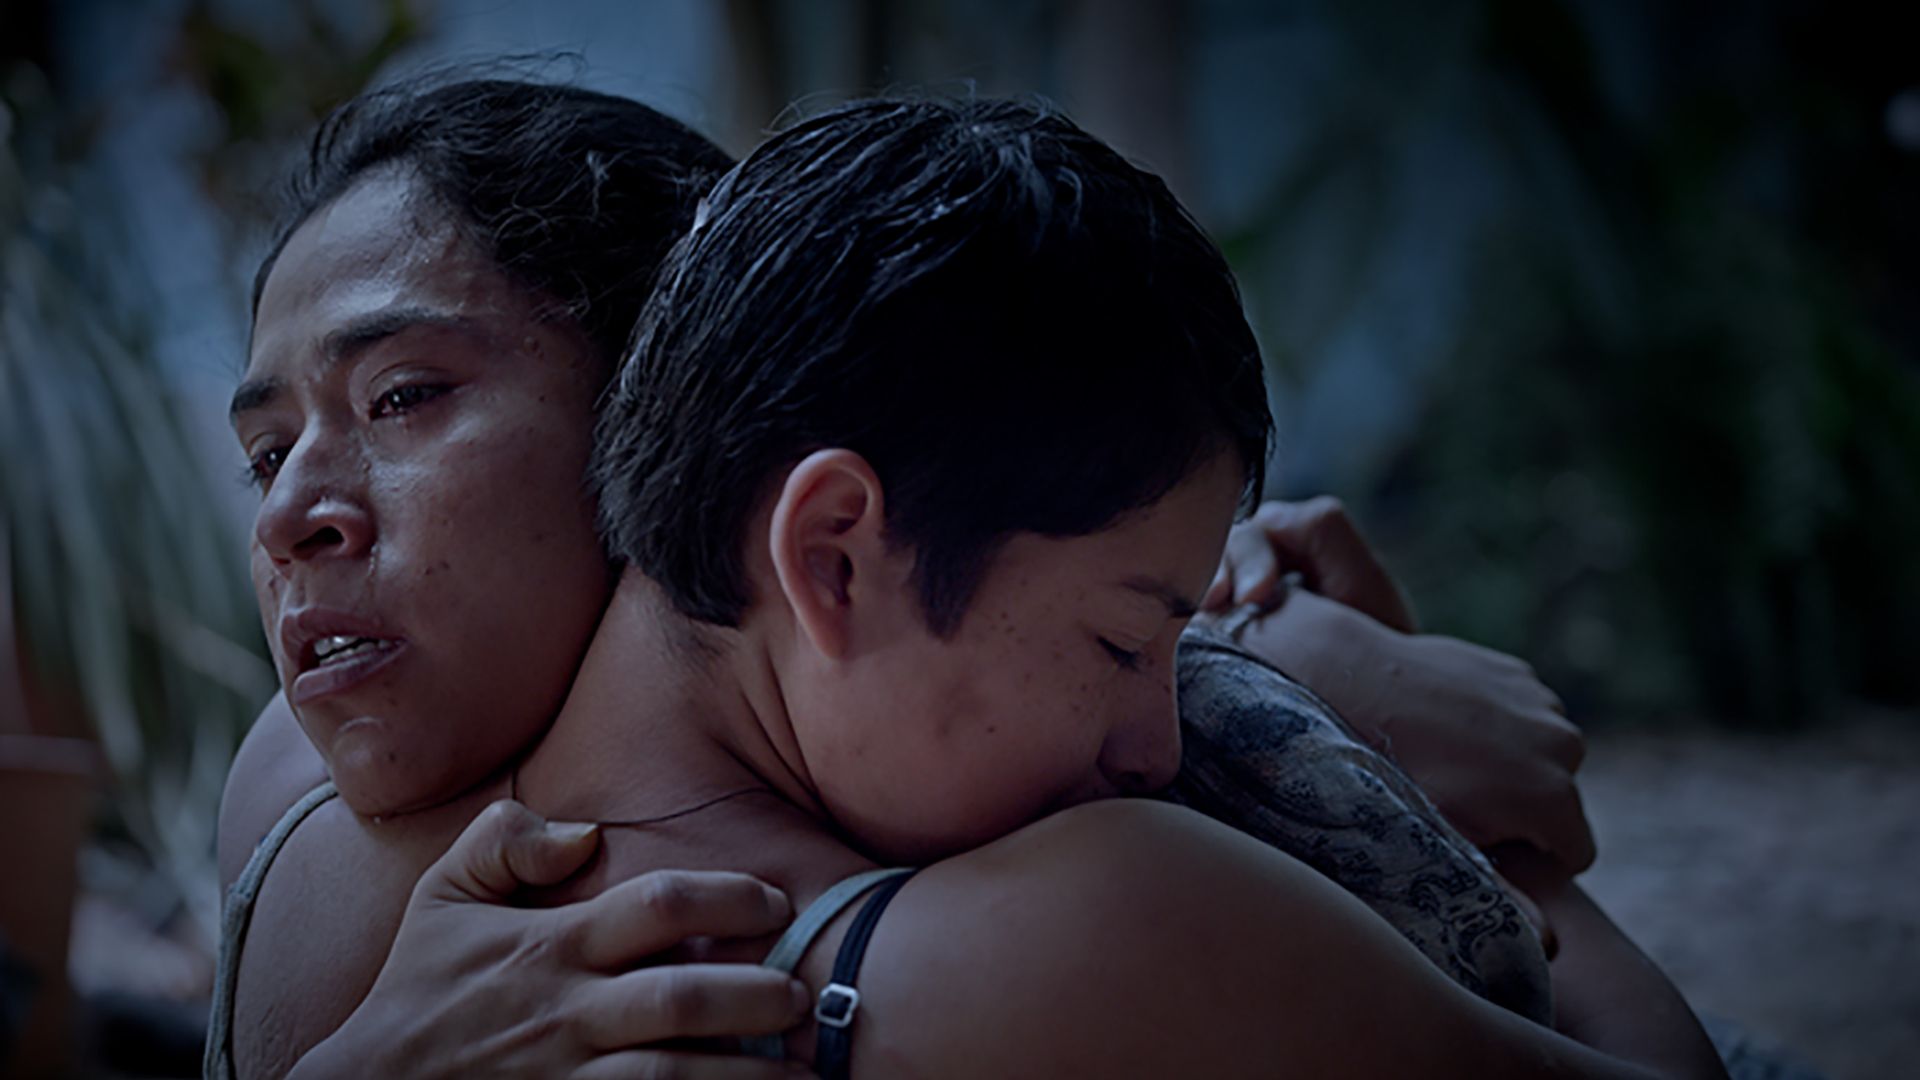 A daughter hugs her mother in a scene from the film "Prayers for the Stolen" (Noche de Fuego. 